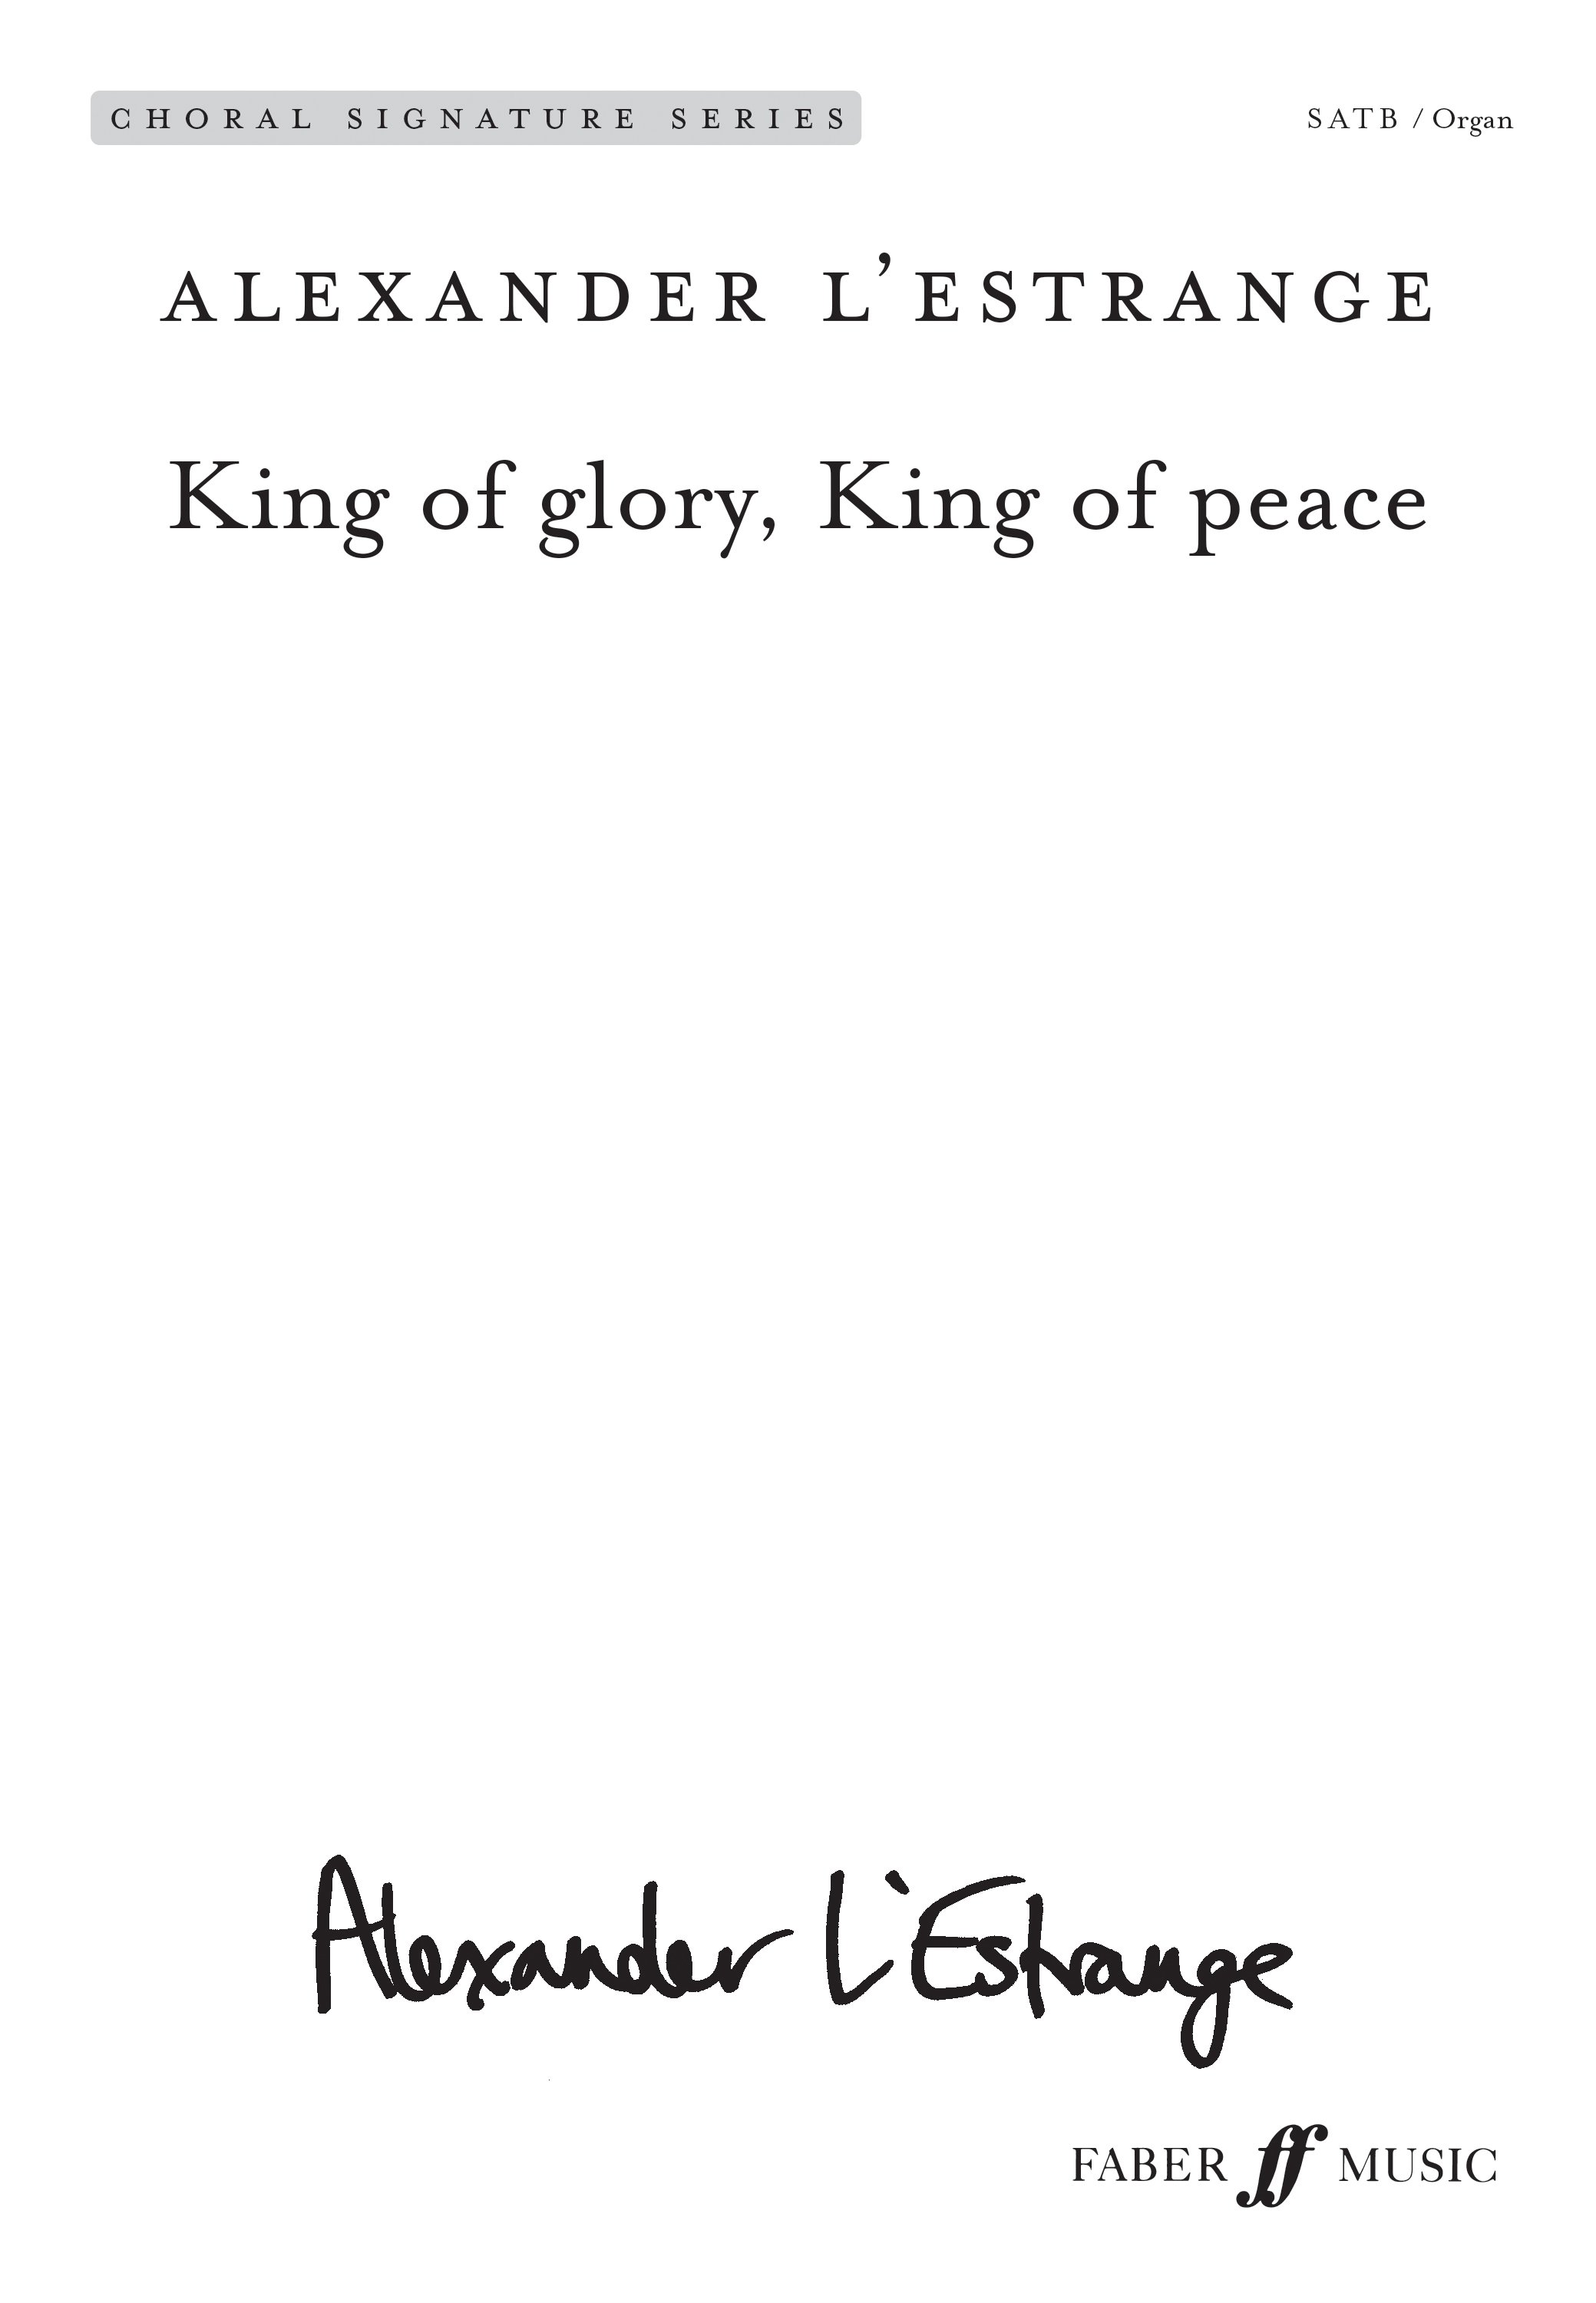 King of Glory, King of Peace COVER.jpg